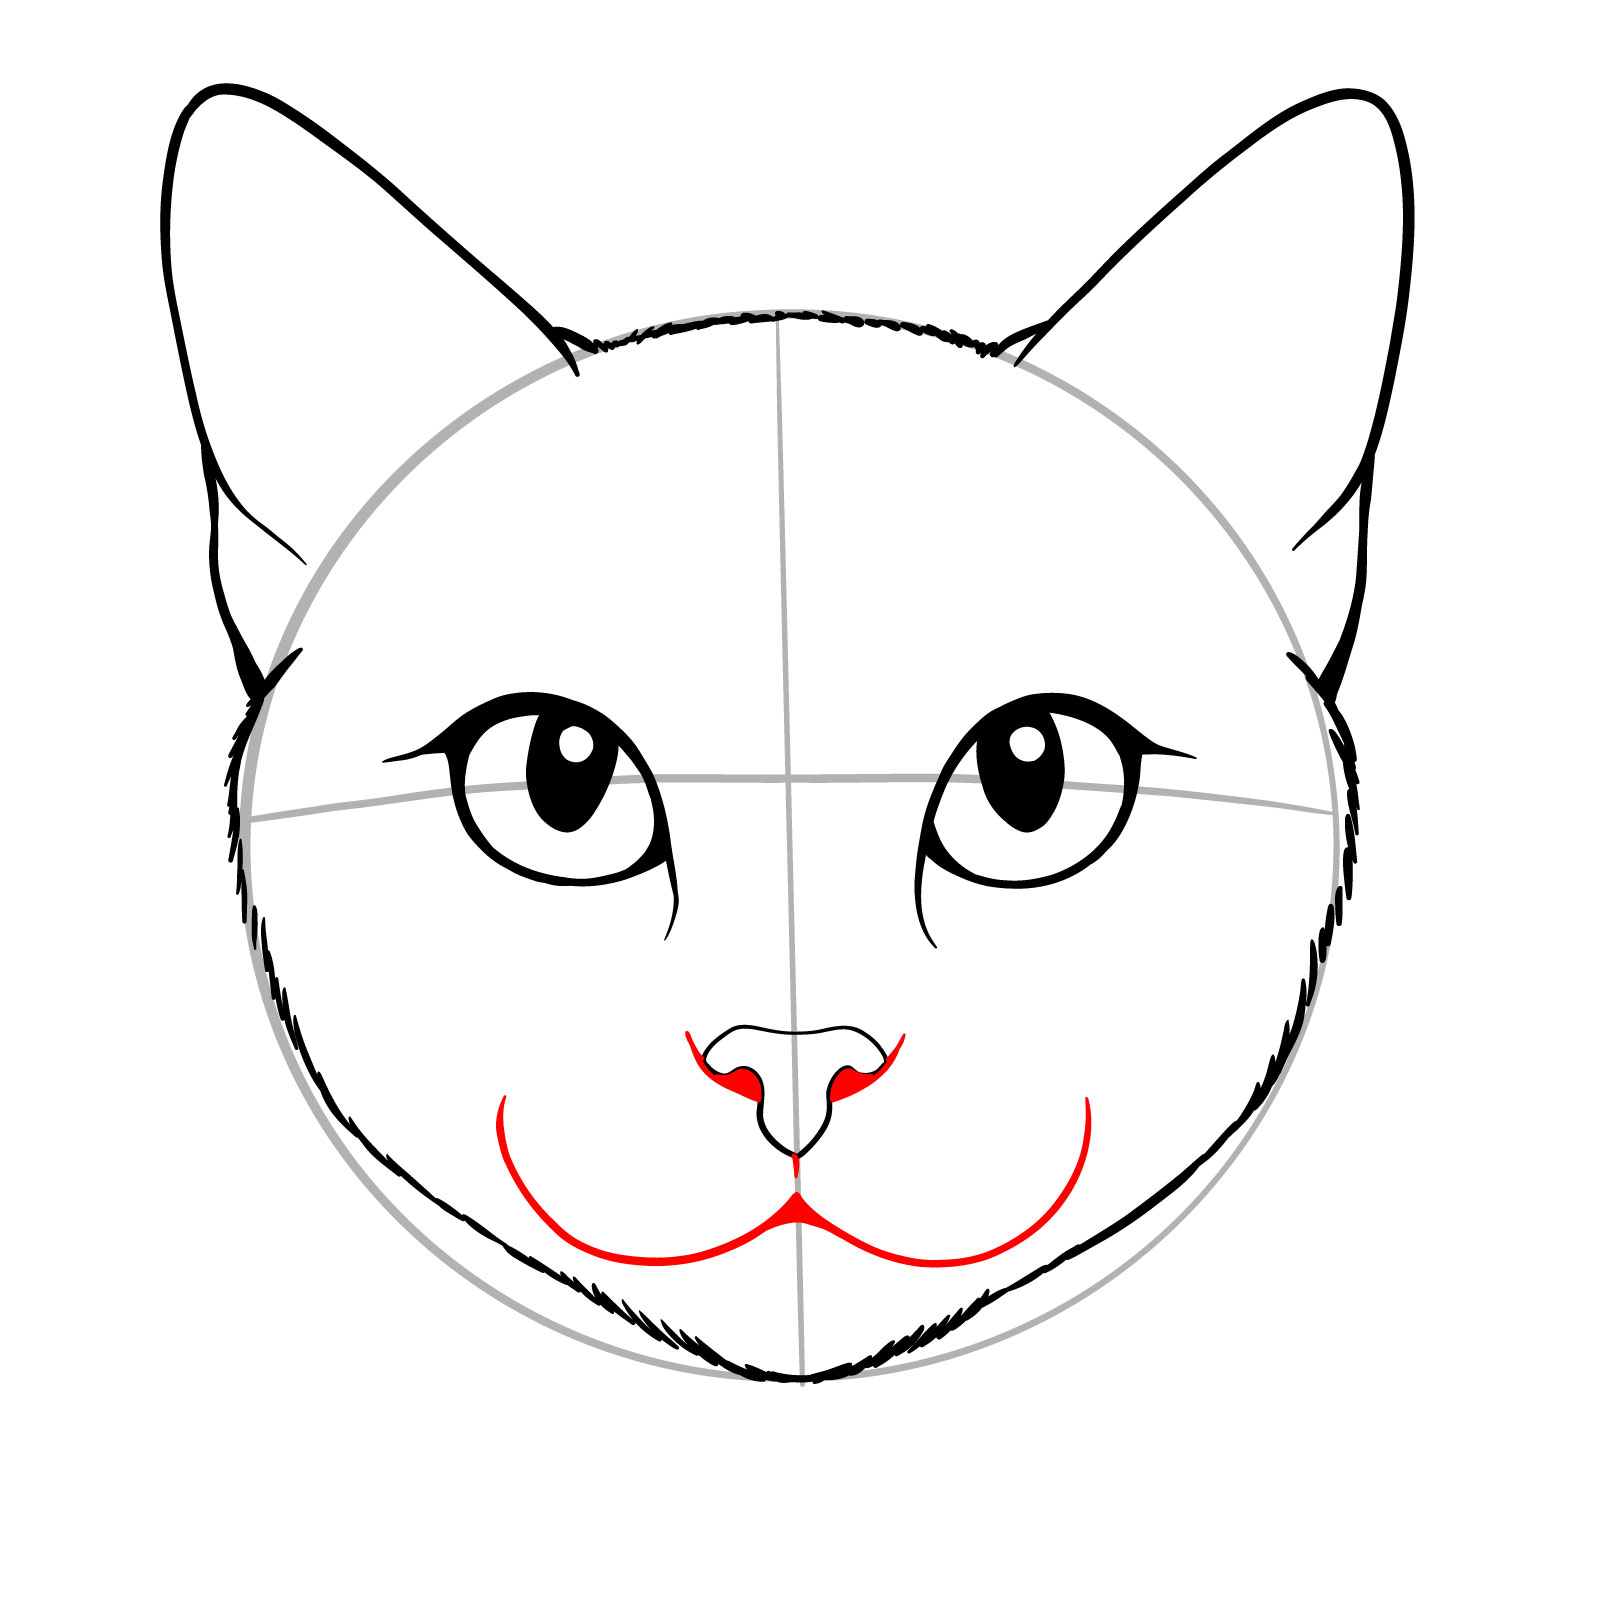 Enhanced sketch of cat's face with darkened nostrils and mouth shape - step 06